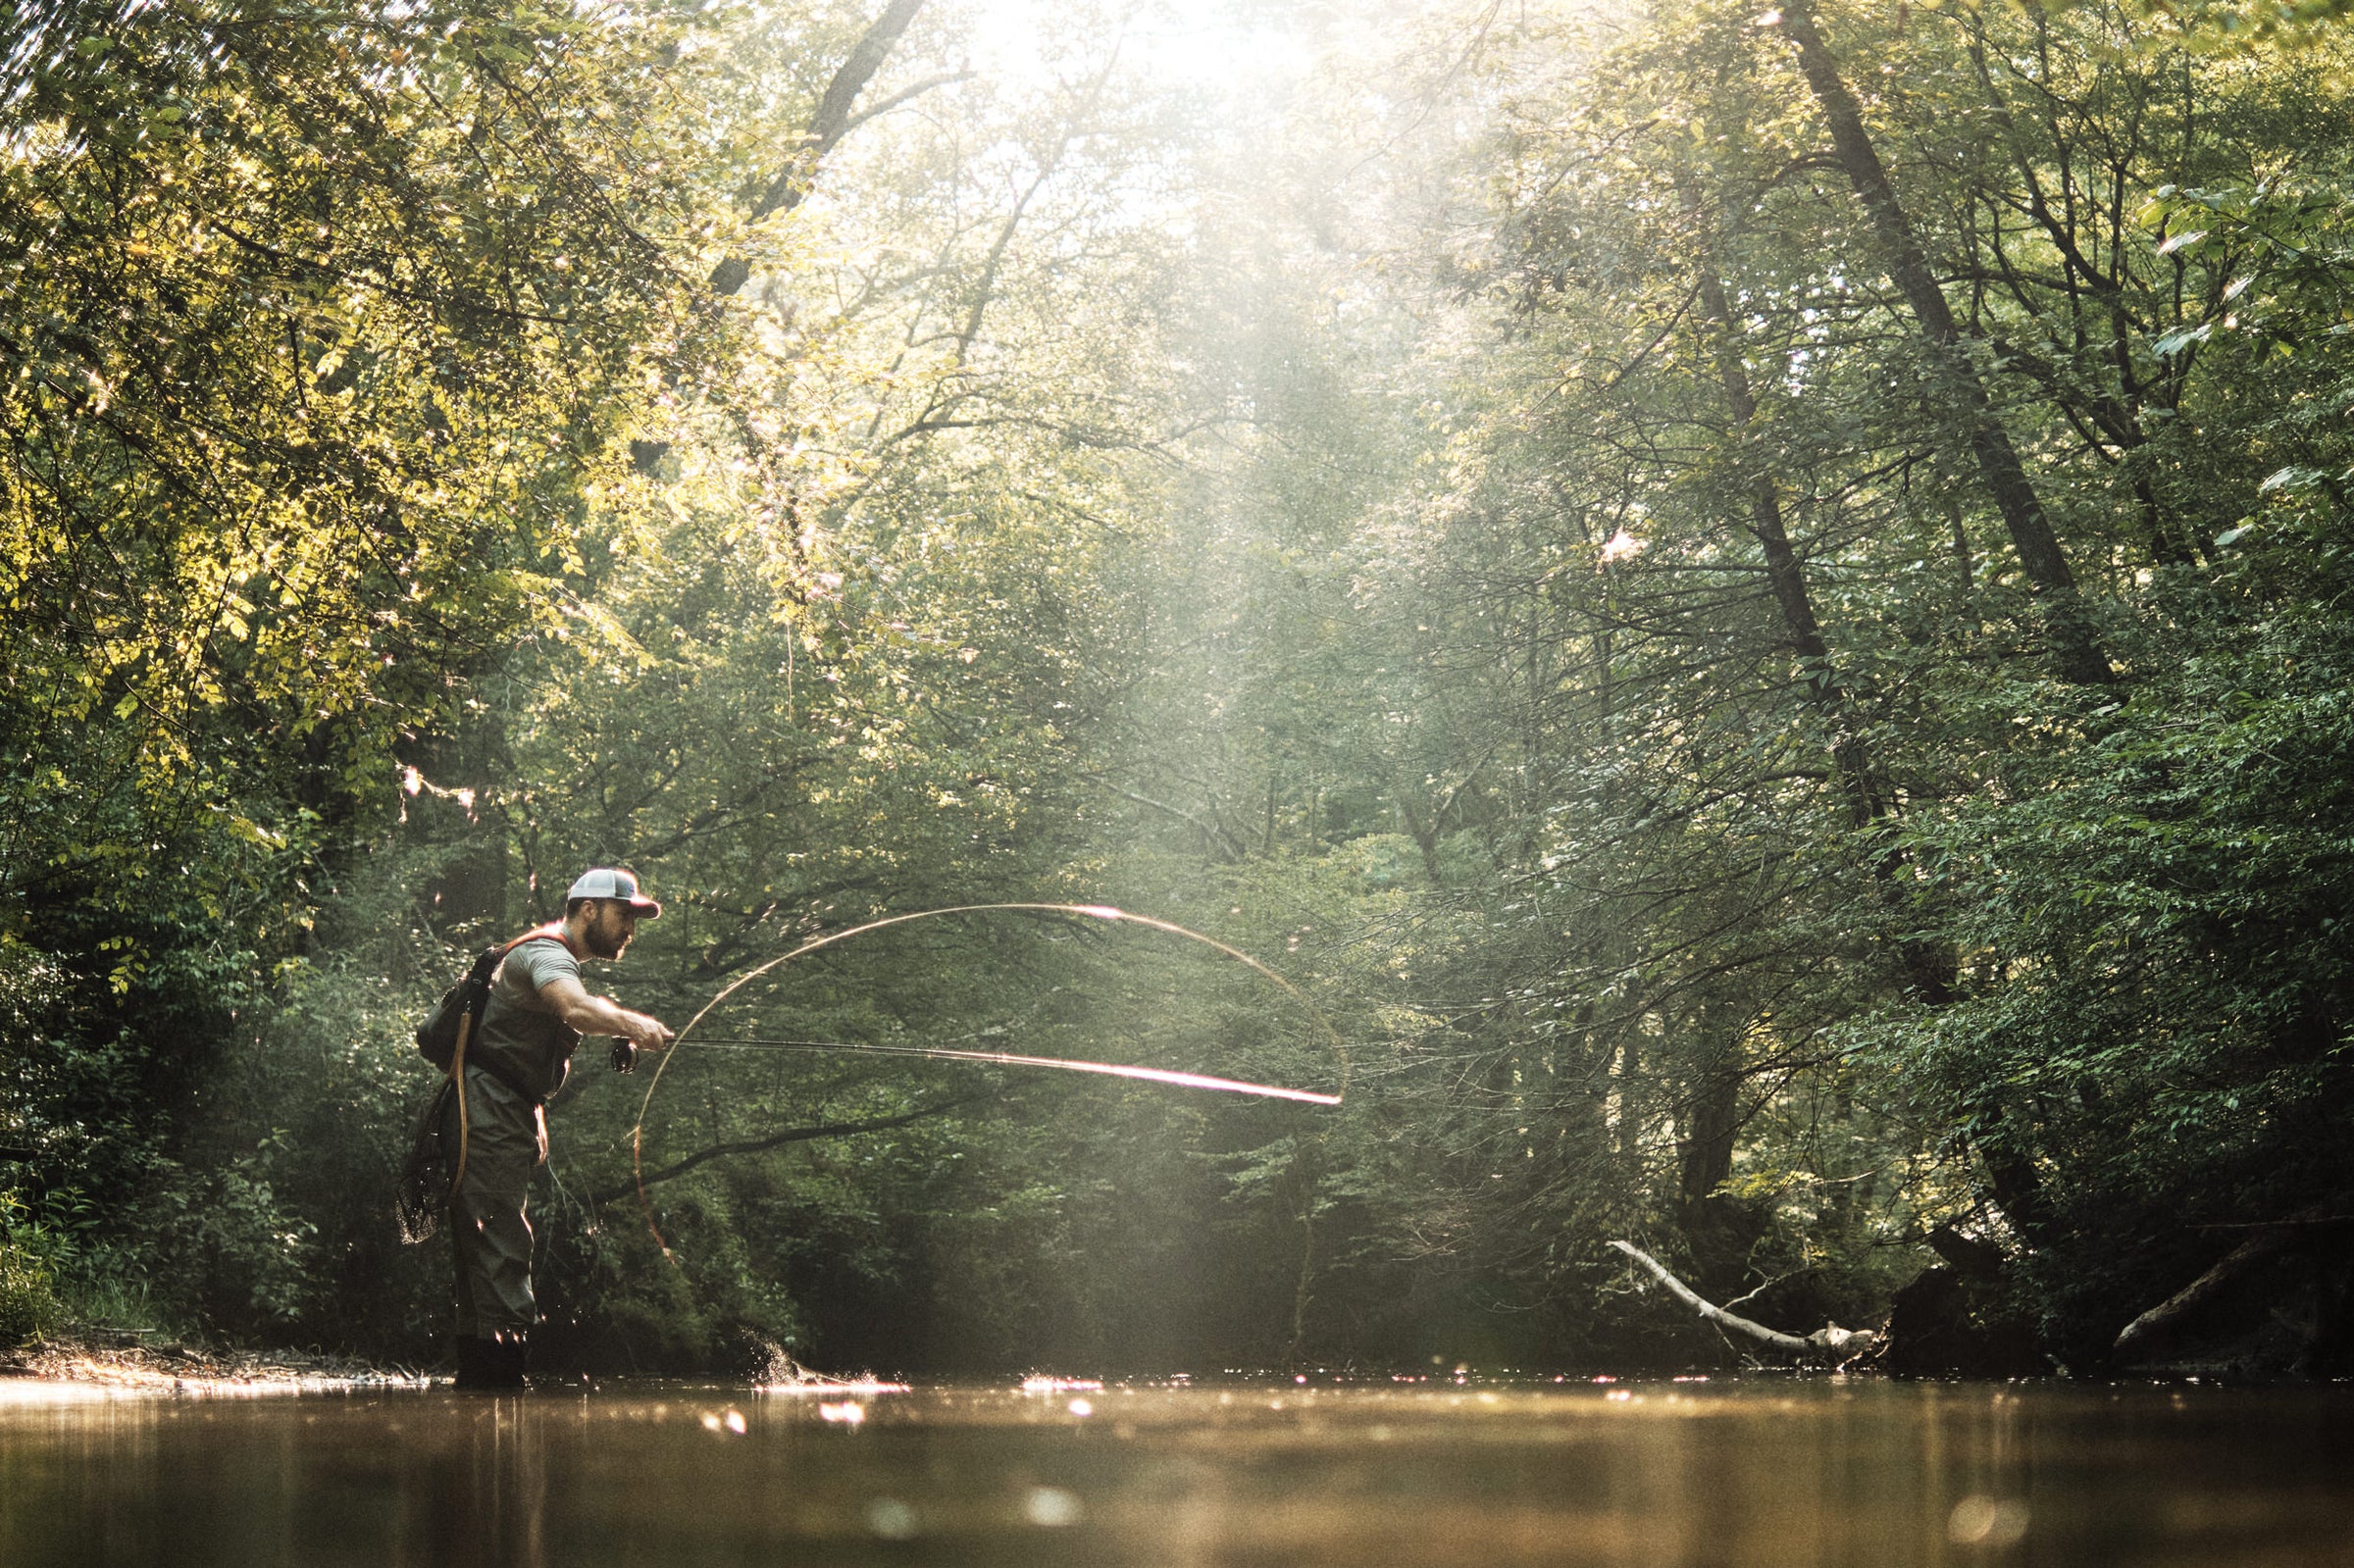 Fly Fishing Guide Service in the Carolinas and East Tennessee